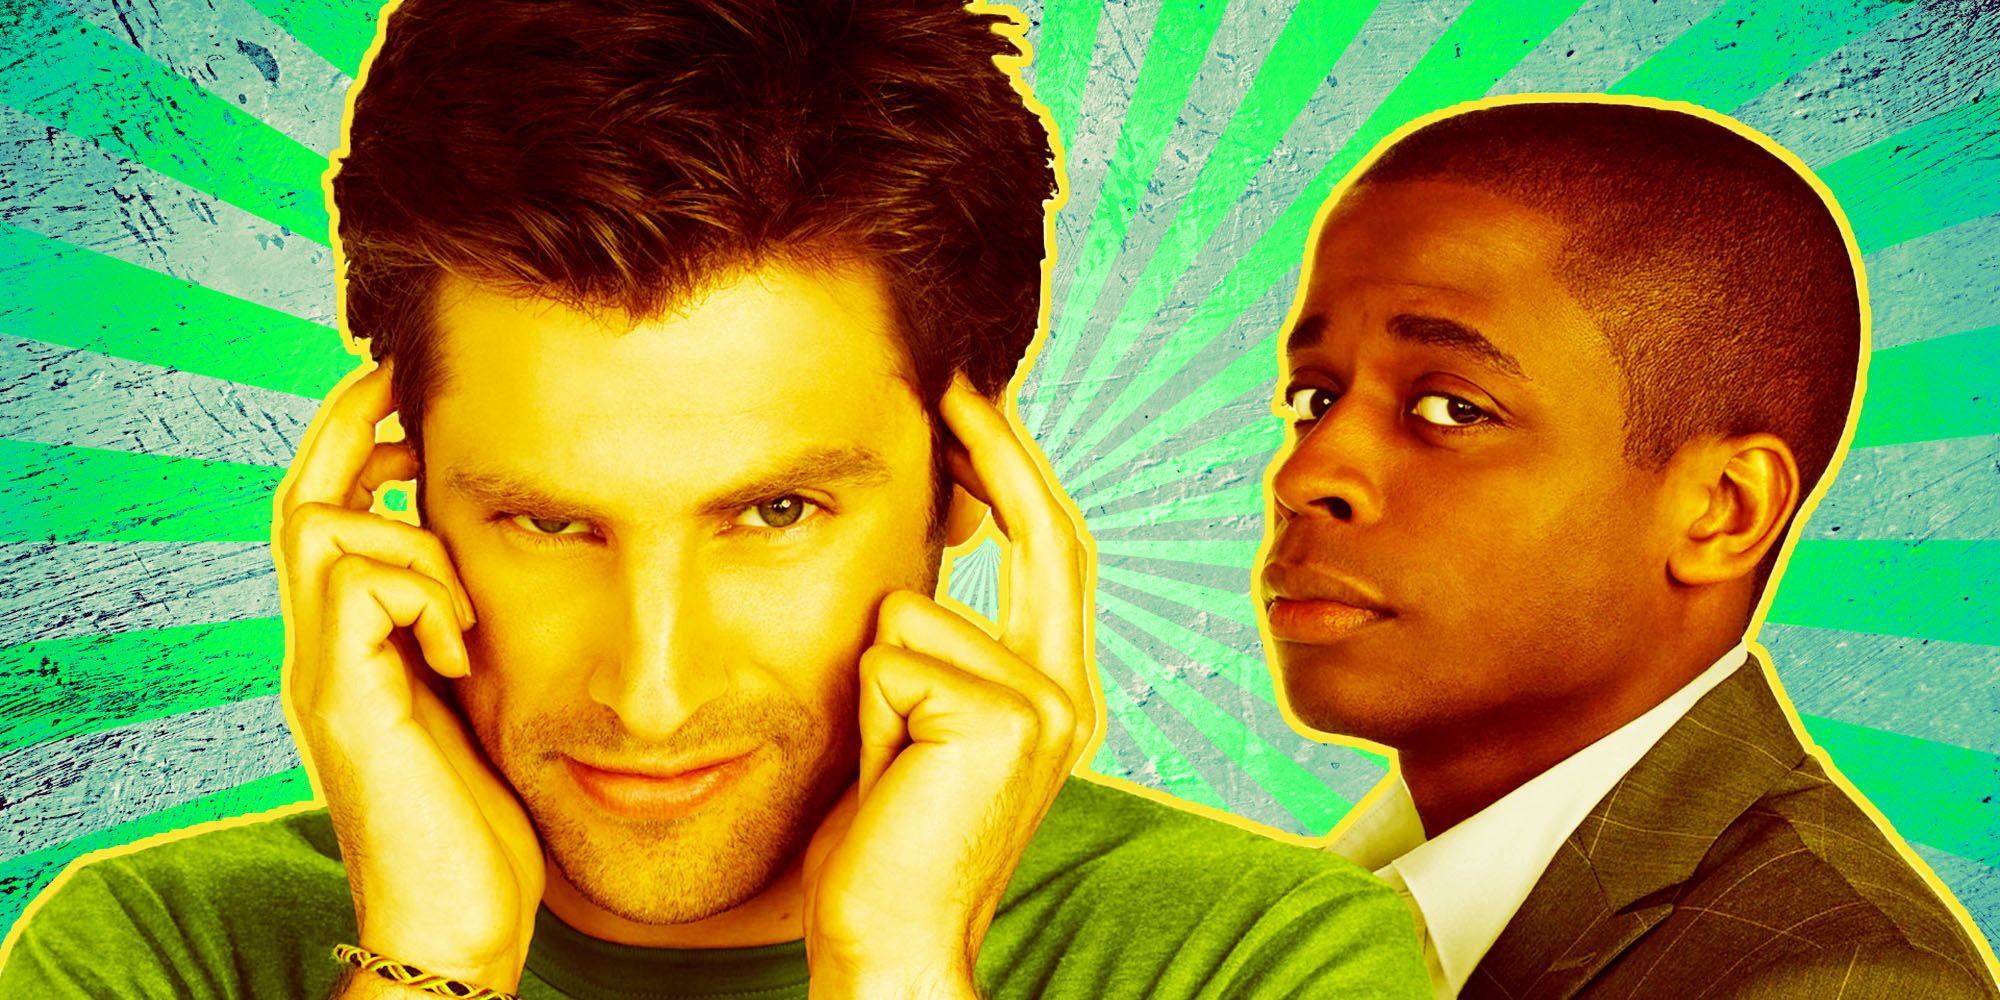 Psych header collage with Shawn and Gus